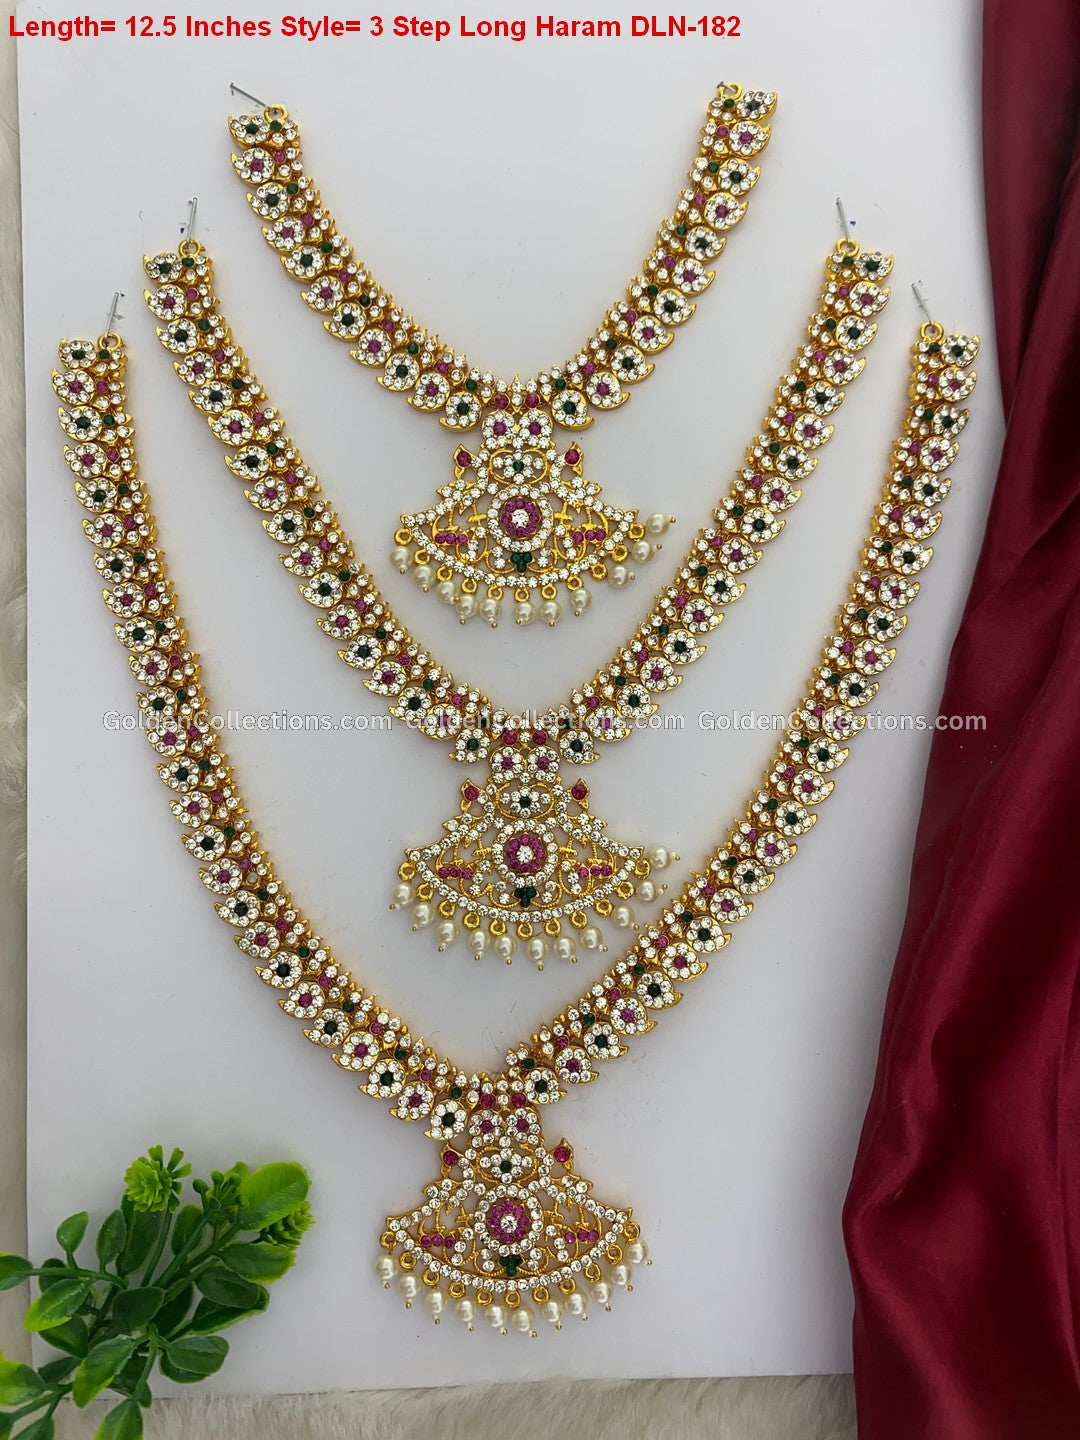 Traditional Goddess Lakshmi Necklace - GoldenCollections DLN-182